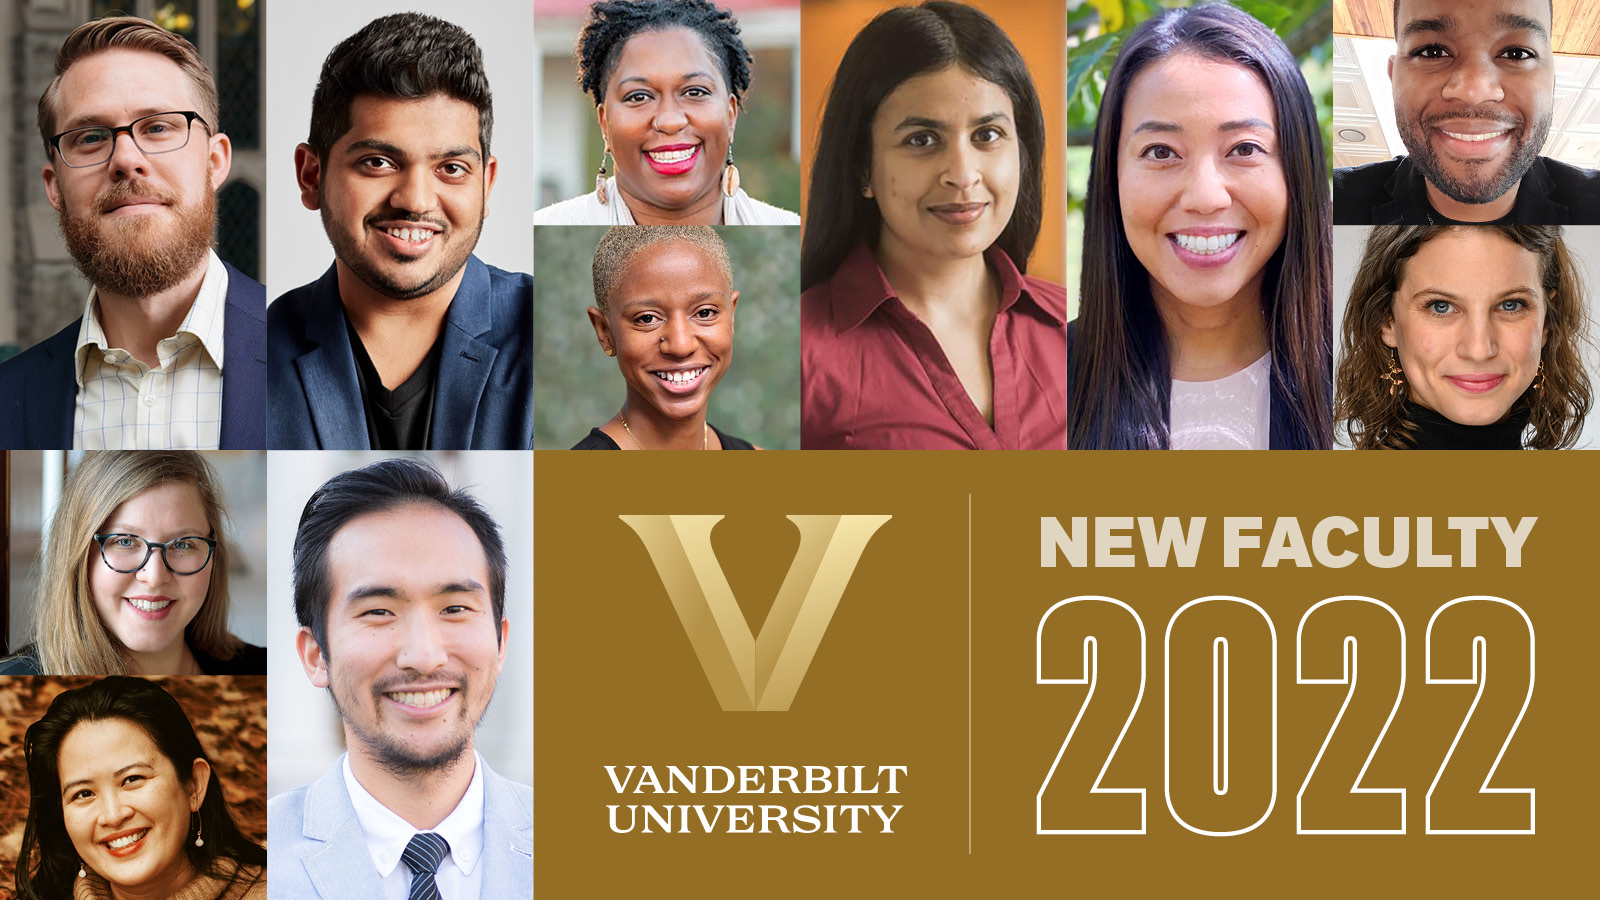 NEW FACULTY: Discovery and research tackling real-world issues